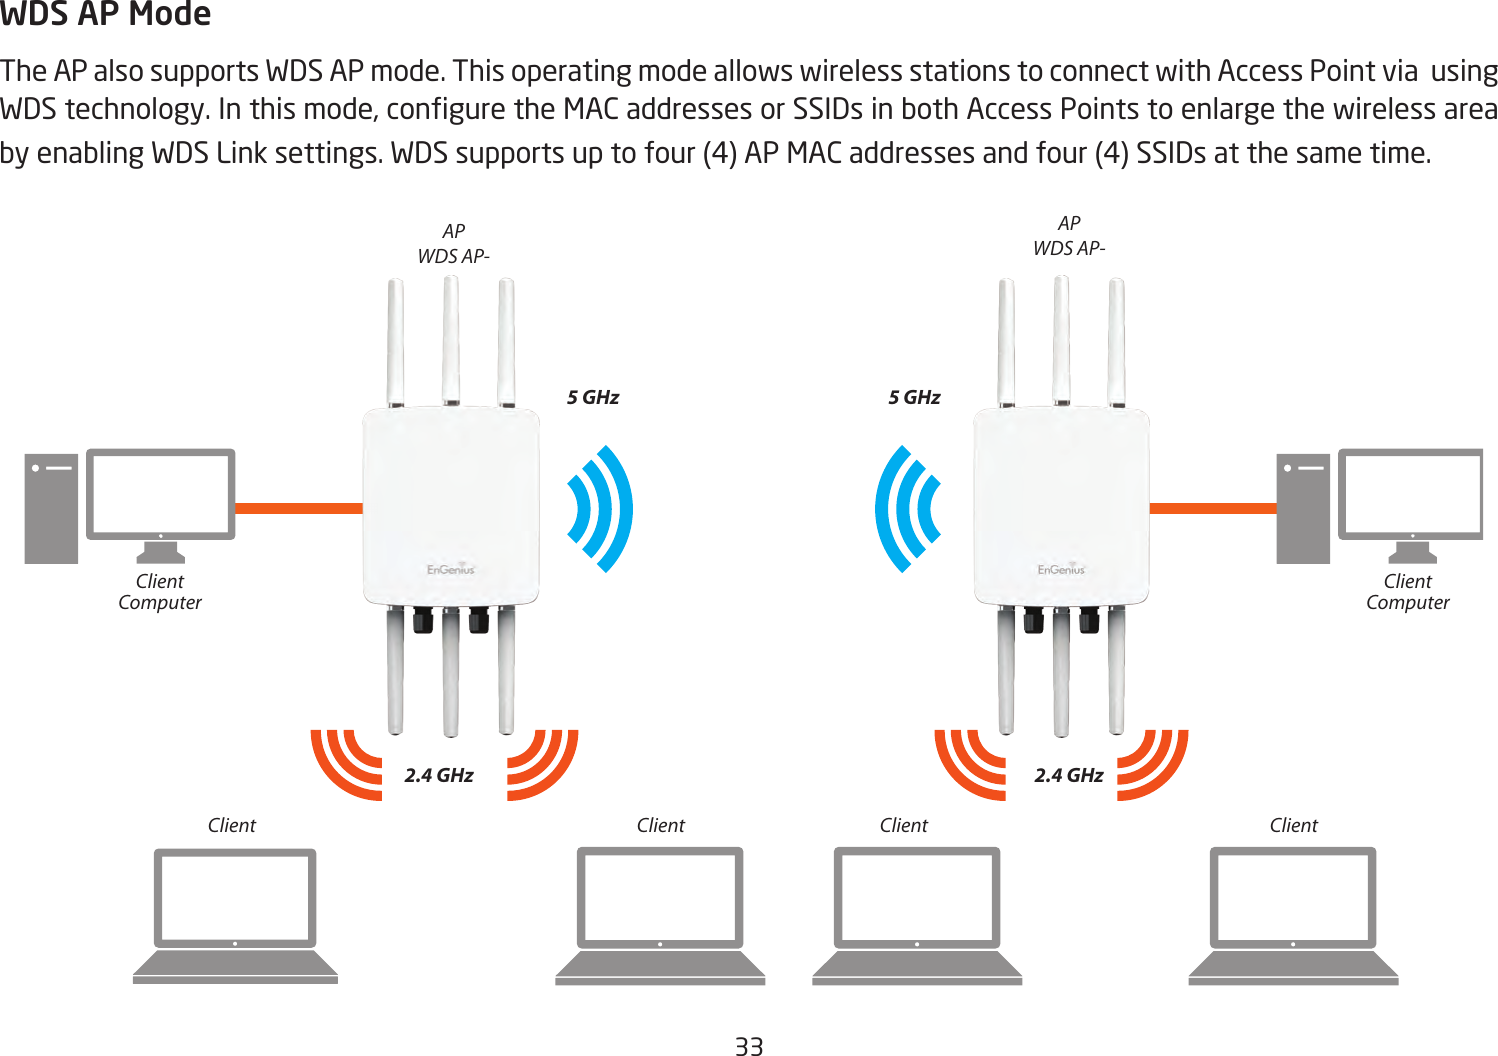 33  WDS AP ModeThe AP also supports WDS AP mode. This operating mode allows wireless stations to connect with Access Point via  using WDS technology. In this mode, congure the MAC addresses or SSIDs in both Access Points to enlarge the wireless area by enabling WDS Link settings. WDS supports up to four (4) AP MAC addresses and four (4) SSIDs at the same time.APWDS AP-APWDS AP-2.4 GHz 2.4 GHz5 GHz 5 GHzClient Client Client ClientClientComputerClientComputer